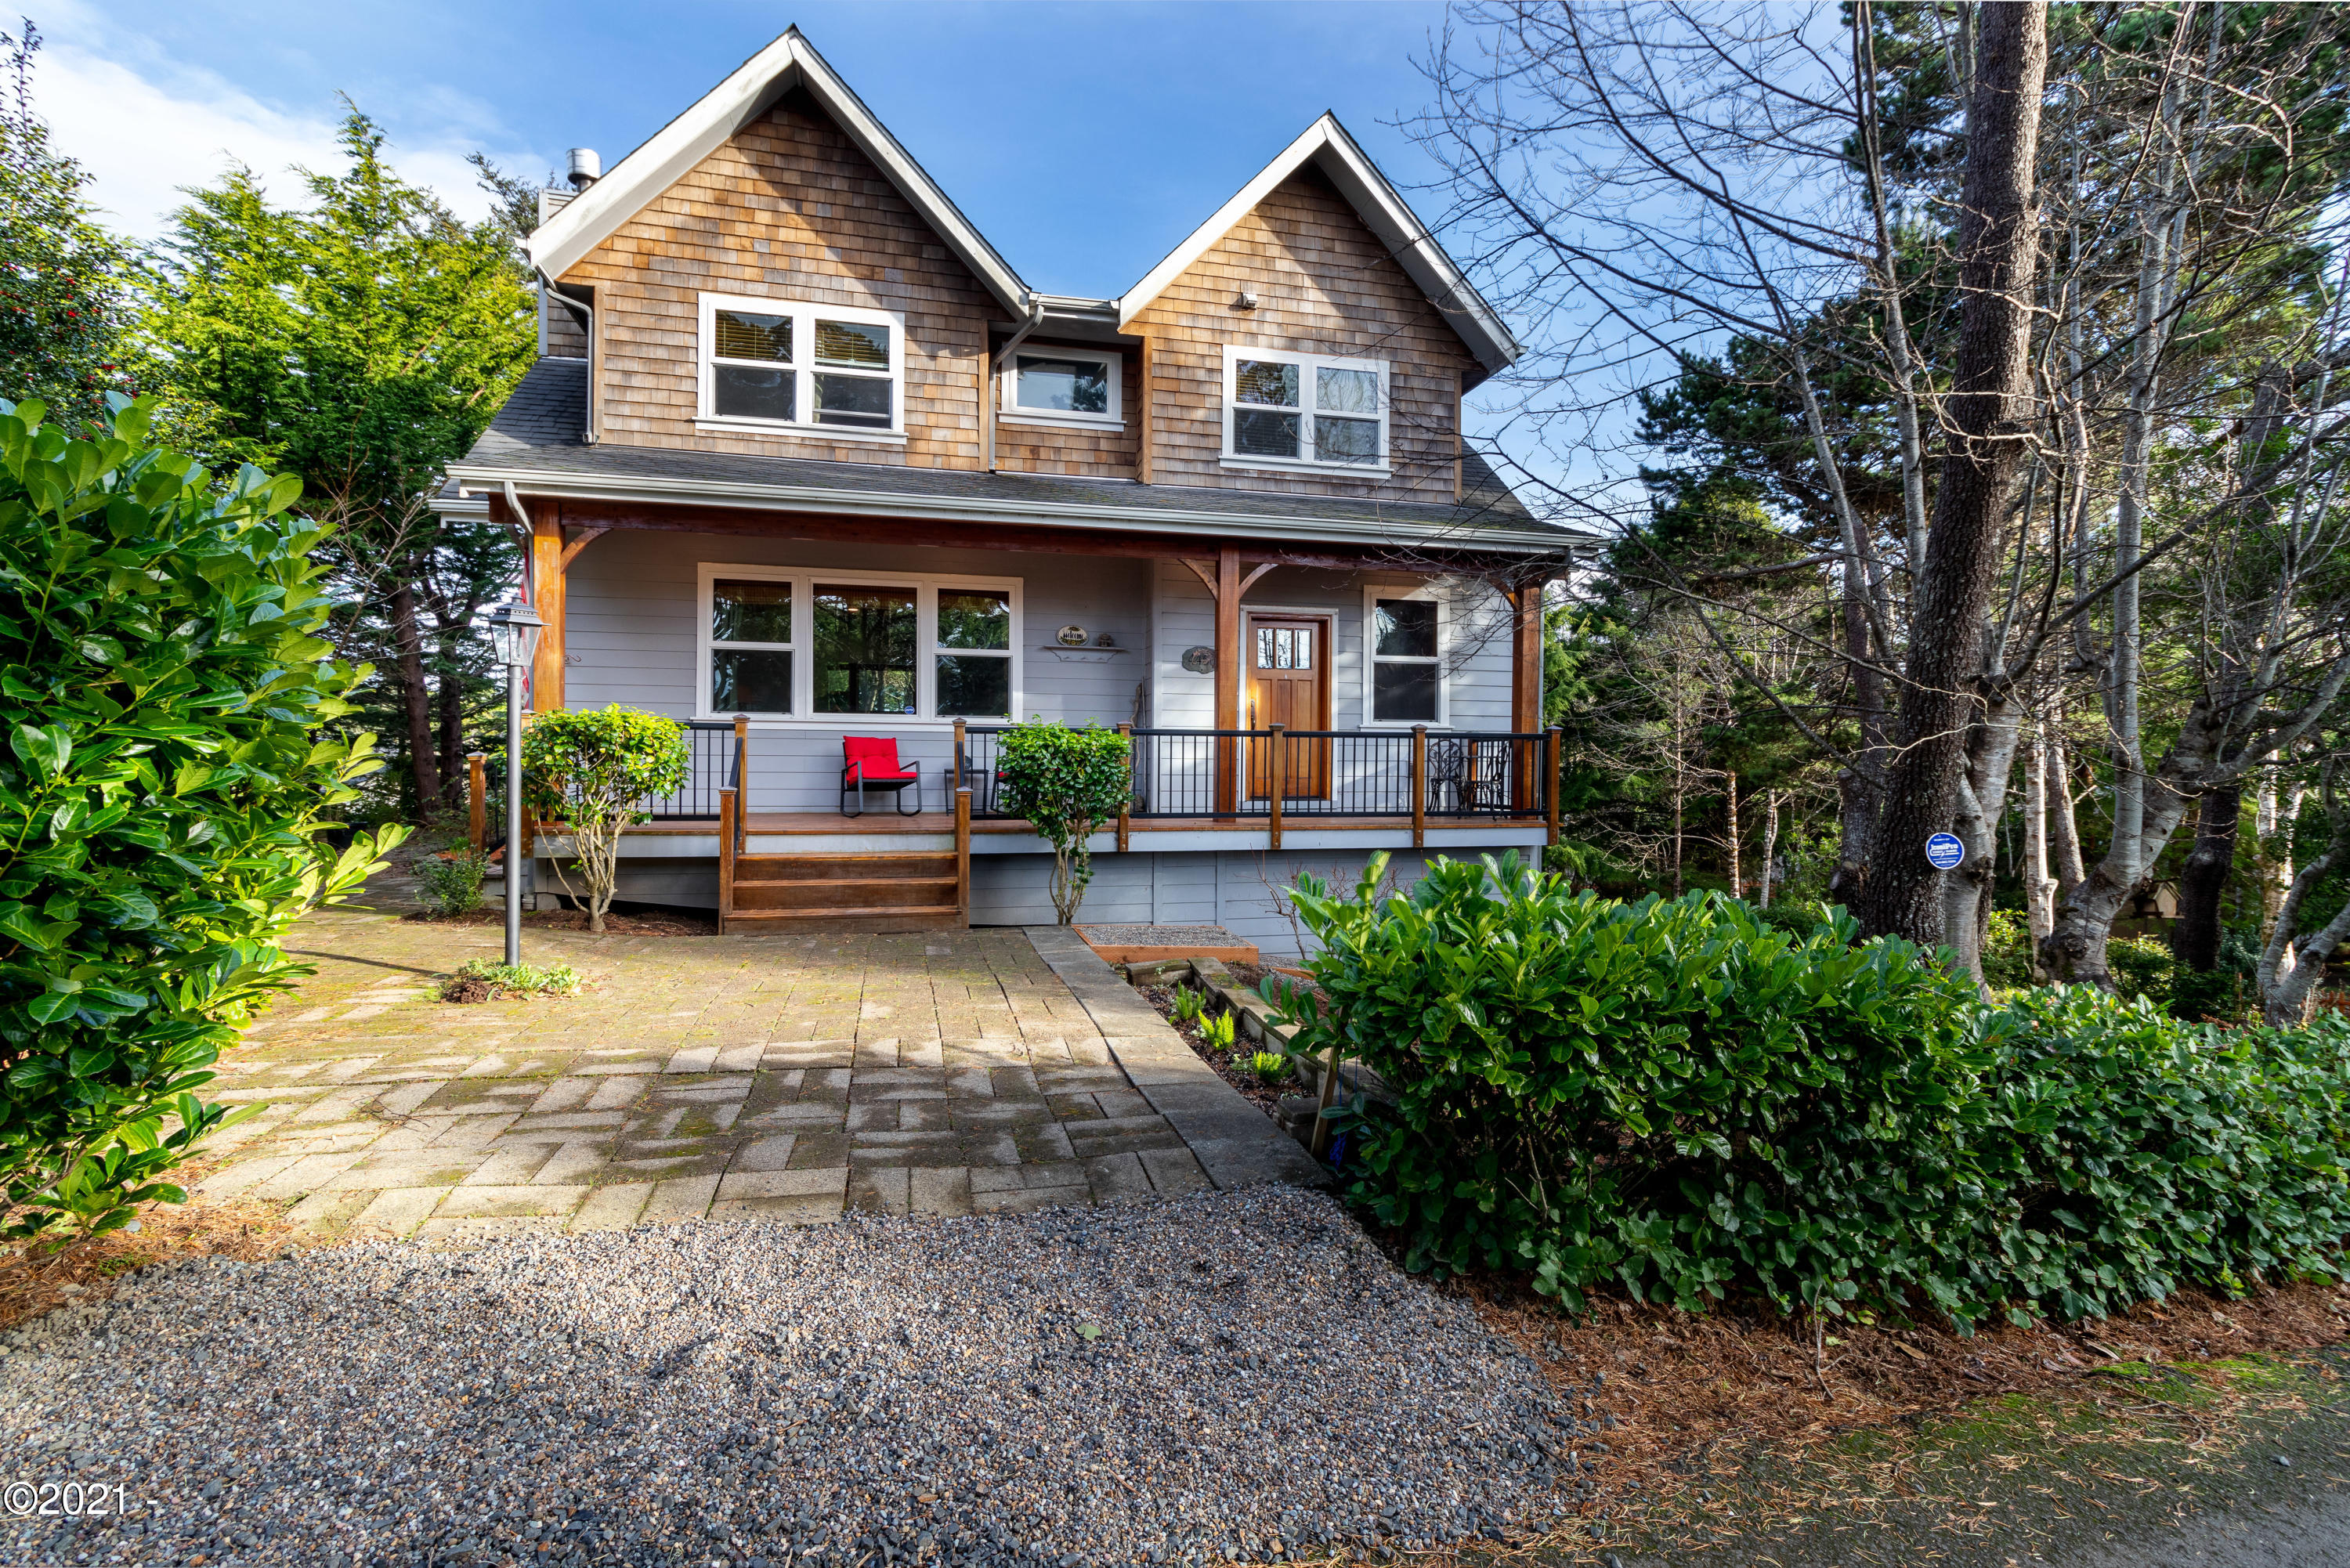 4460 Jack Pine Ave Depoe Bay, Gleneden Beach, Lincoln City, Newport, Otis, Rose Lodge, Seal Rock, Waldport, Yachats, To Home Listings - Amy Plechaty, Emerald Coast Realty Real Estate, homes for sale, property for sale